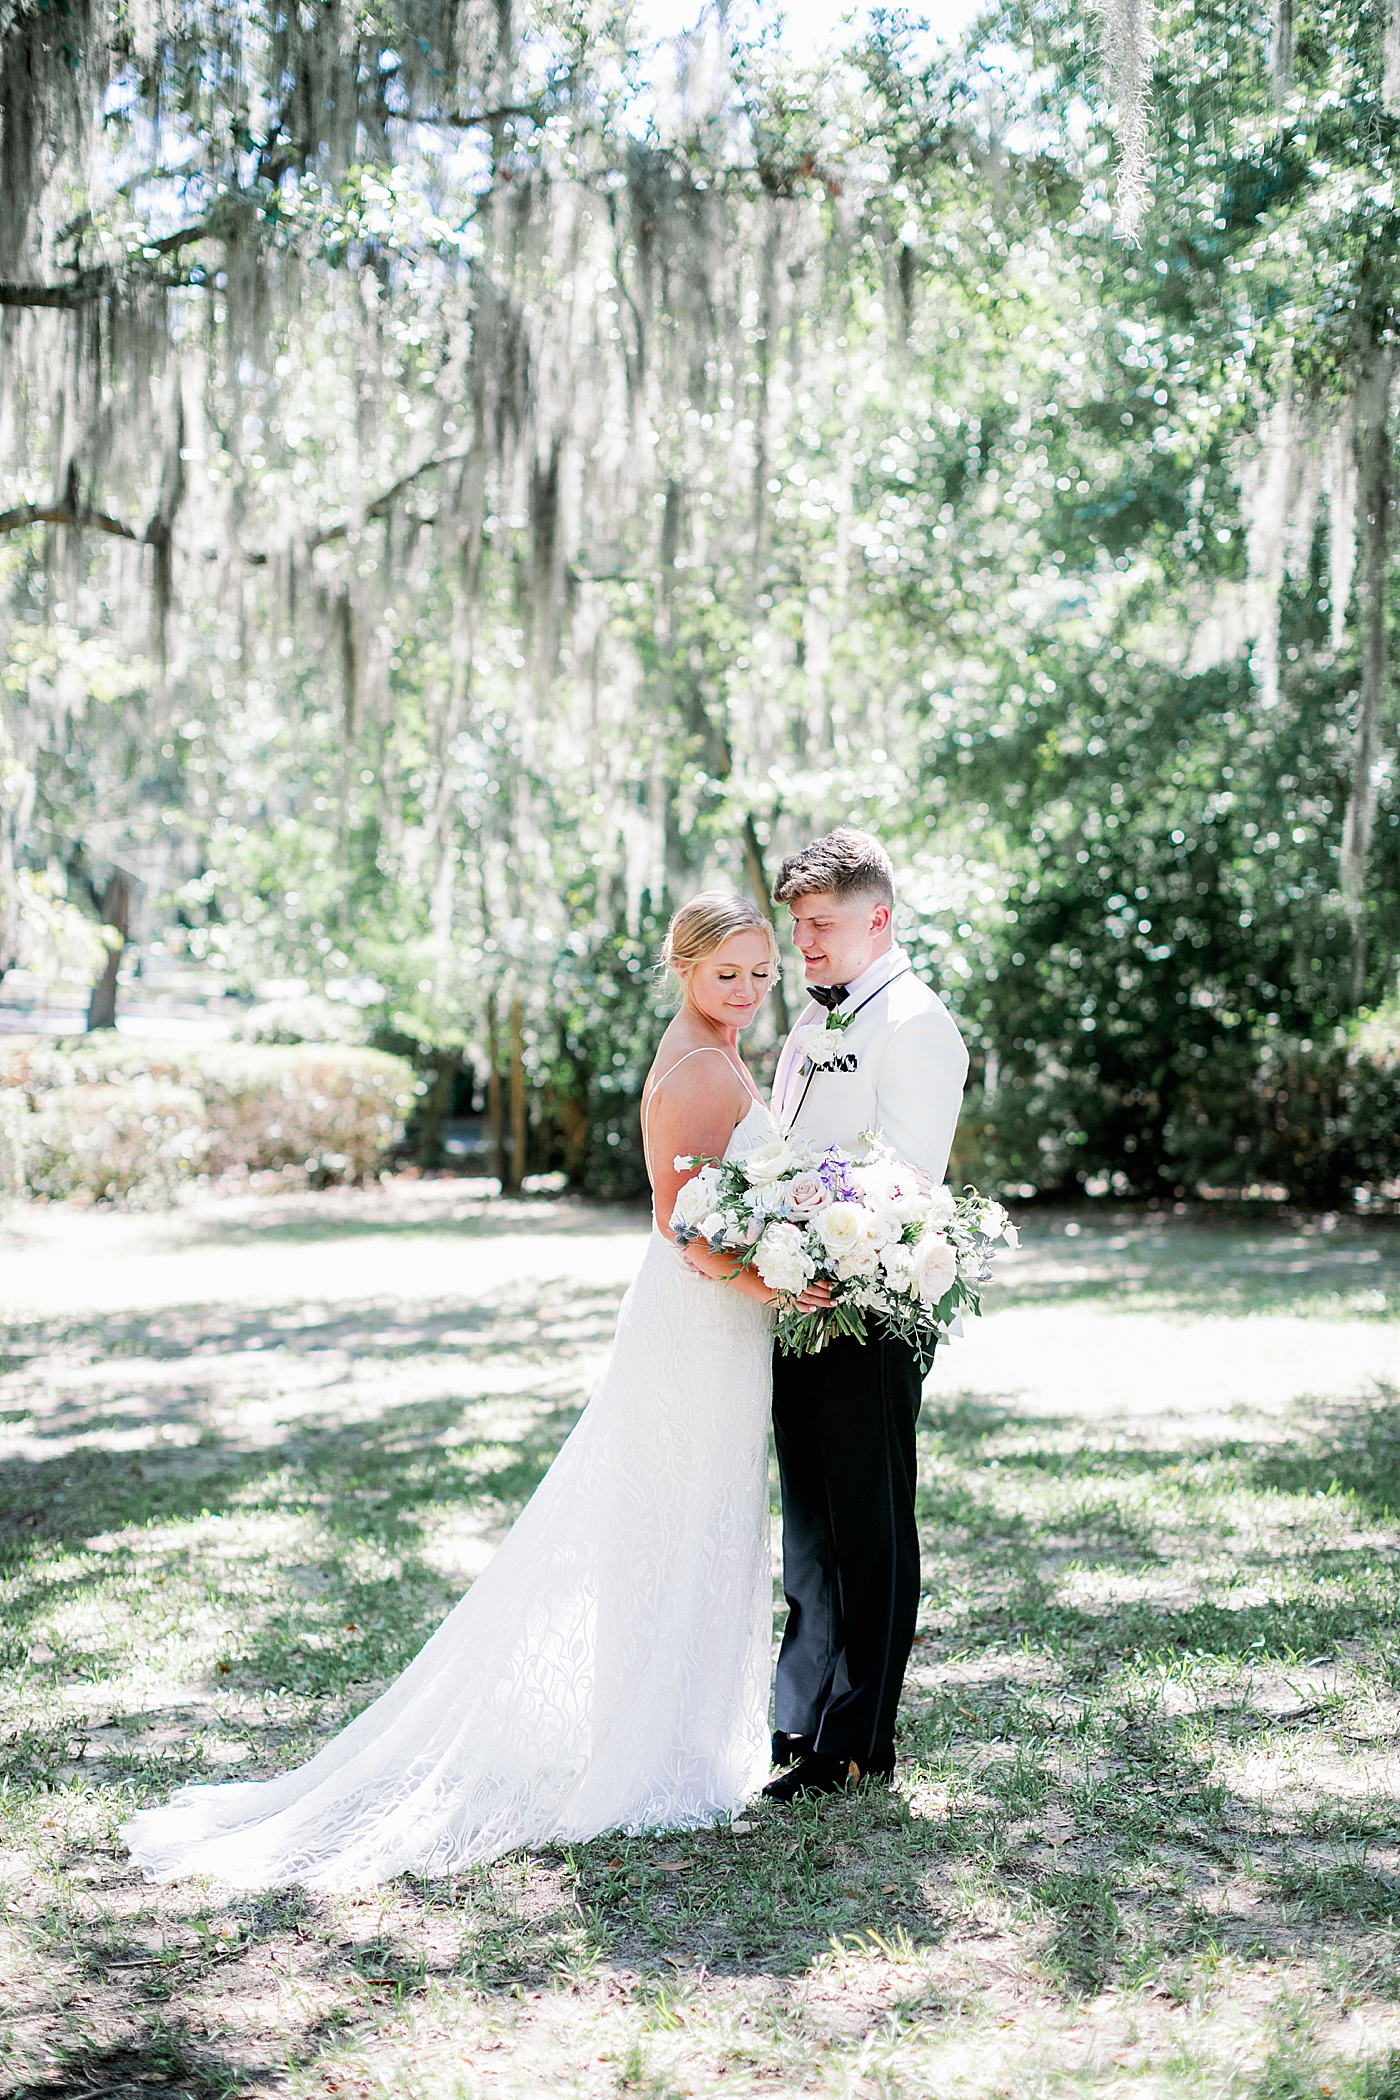 Bride and groom snuggling before their wedding | Images by Annie Laura Photography